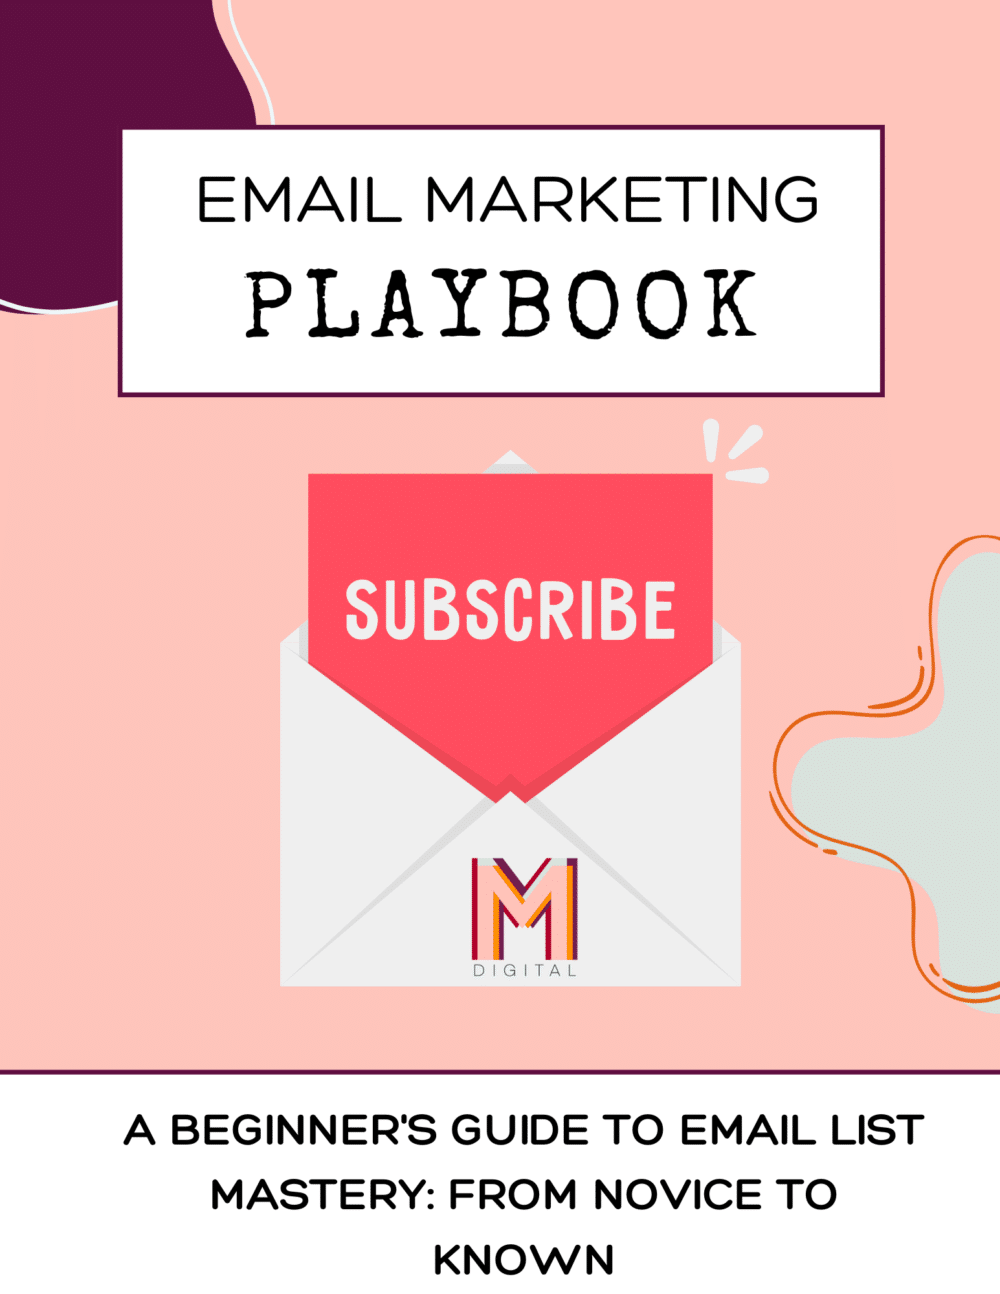 Email Marketing Playbook for Small Business Owners